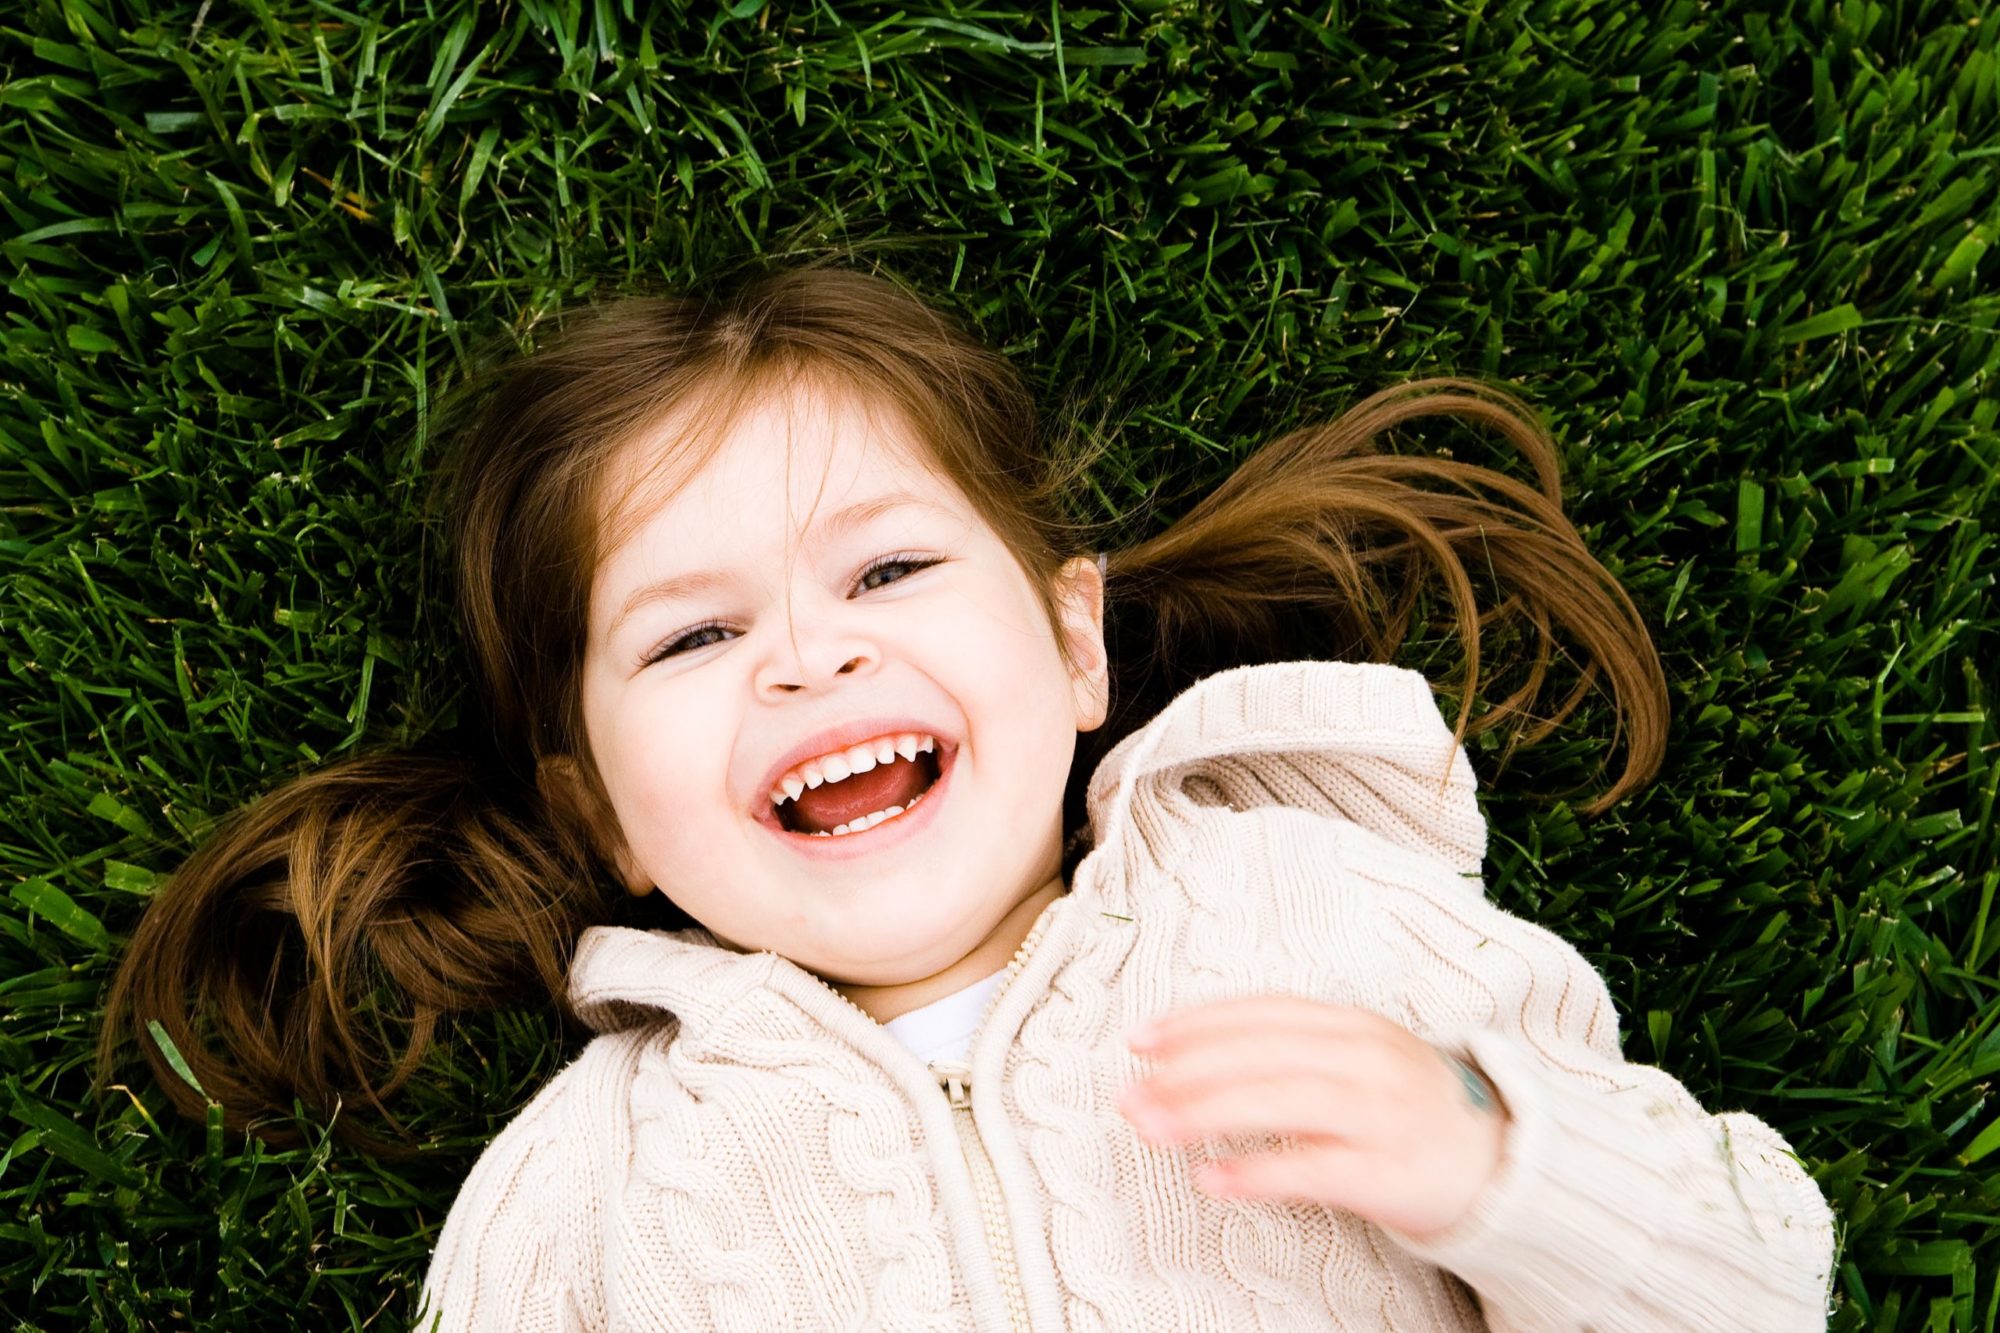 young girl smiling in grass with pigtails